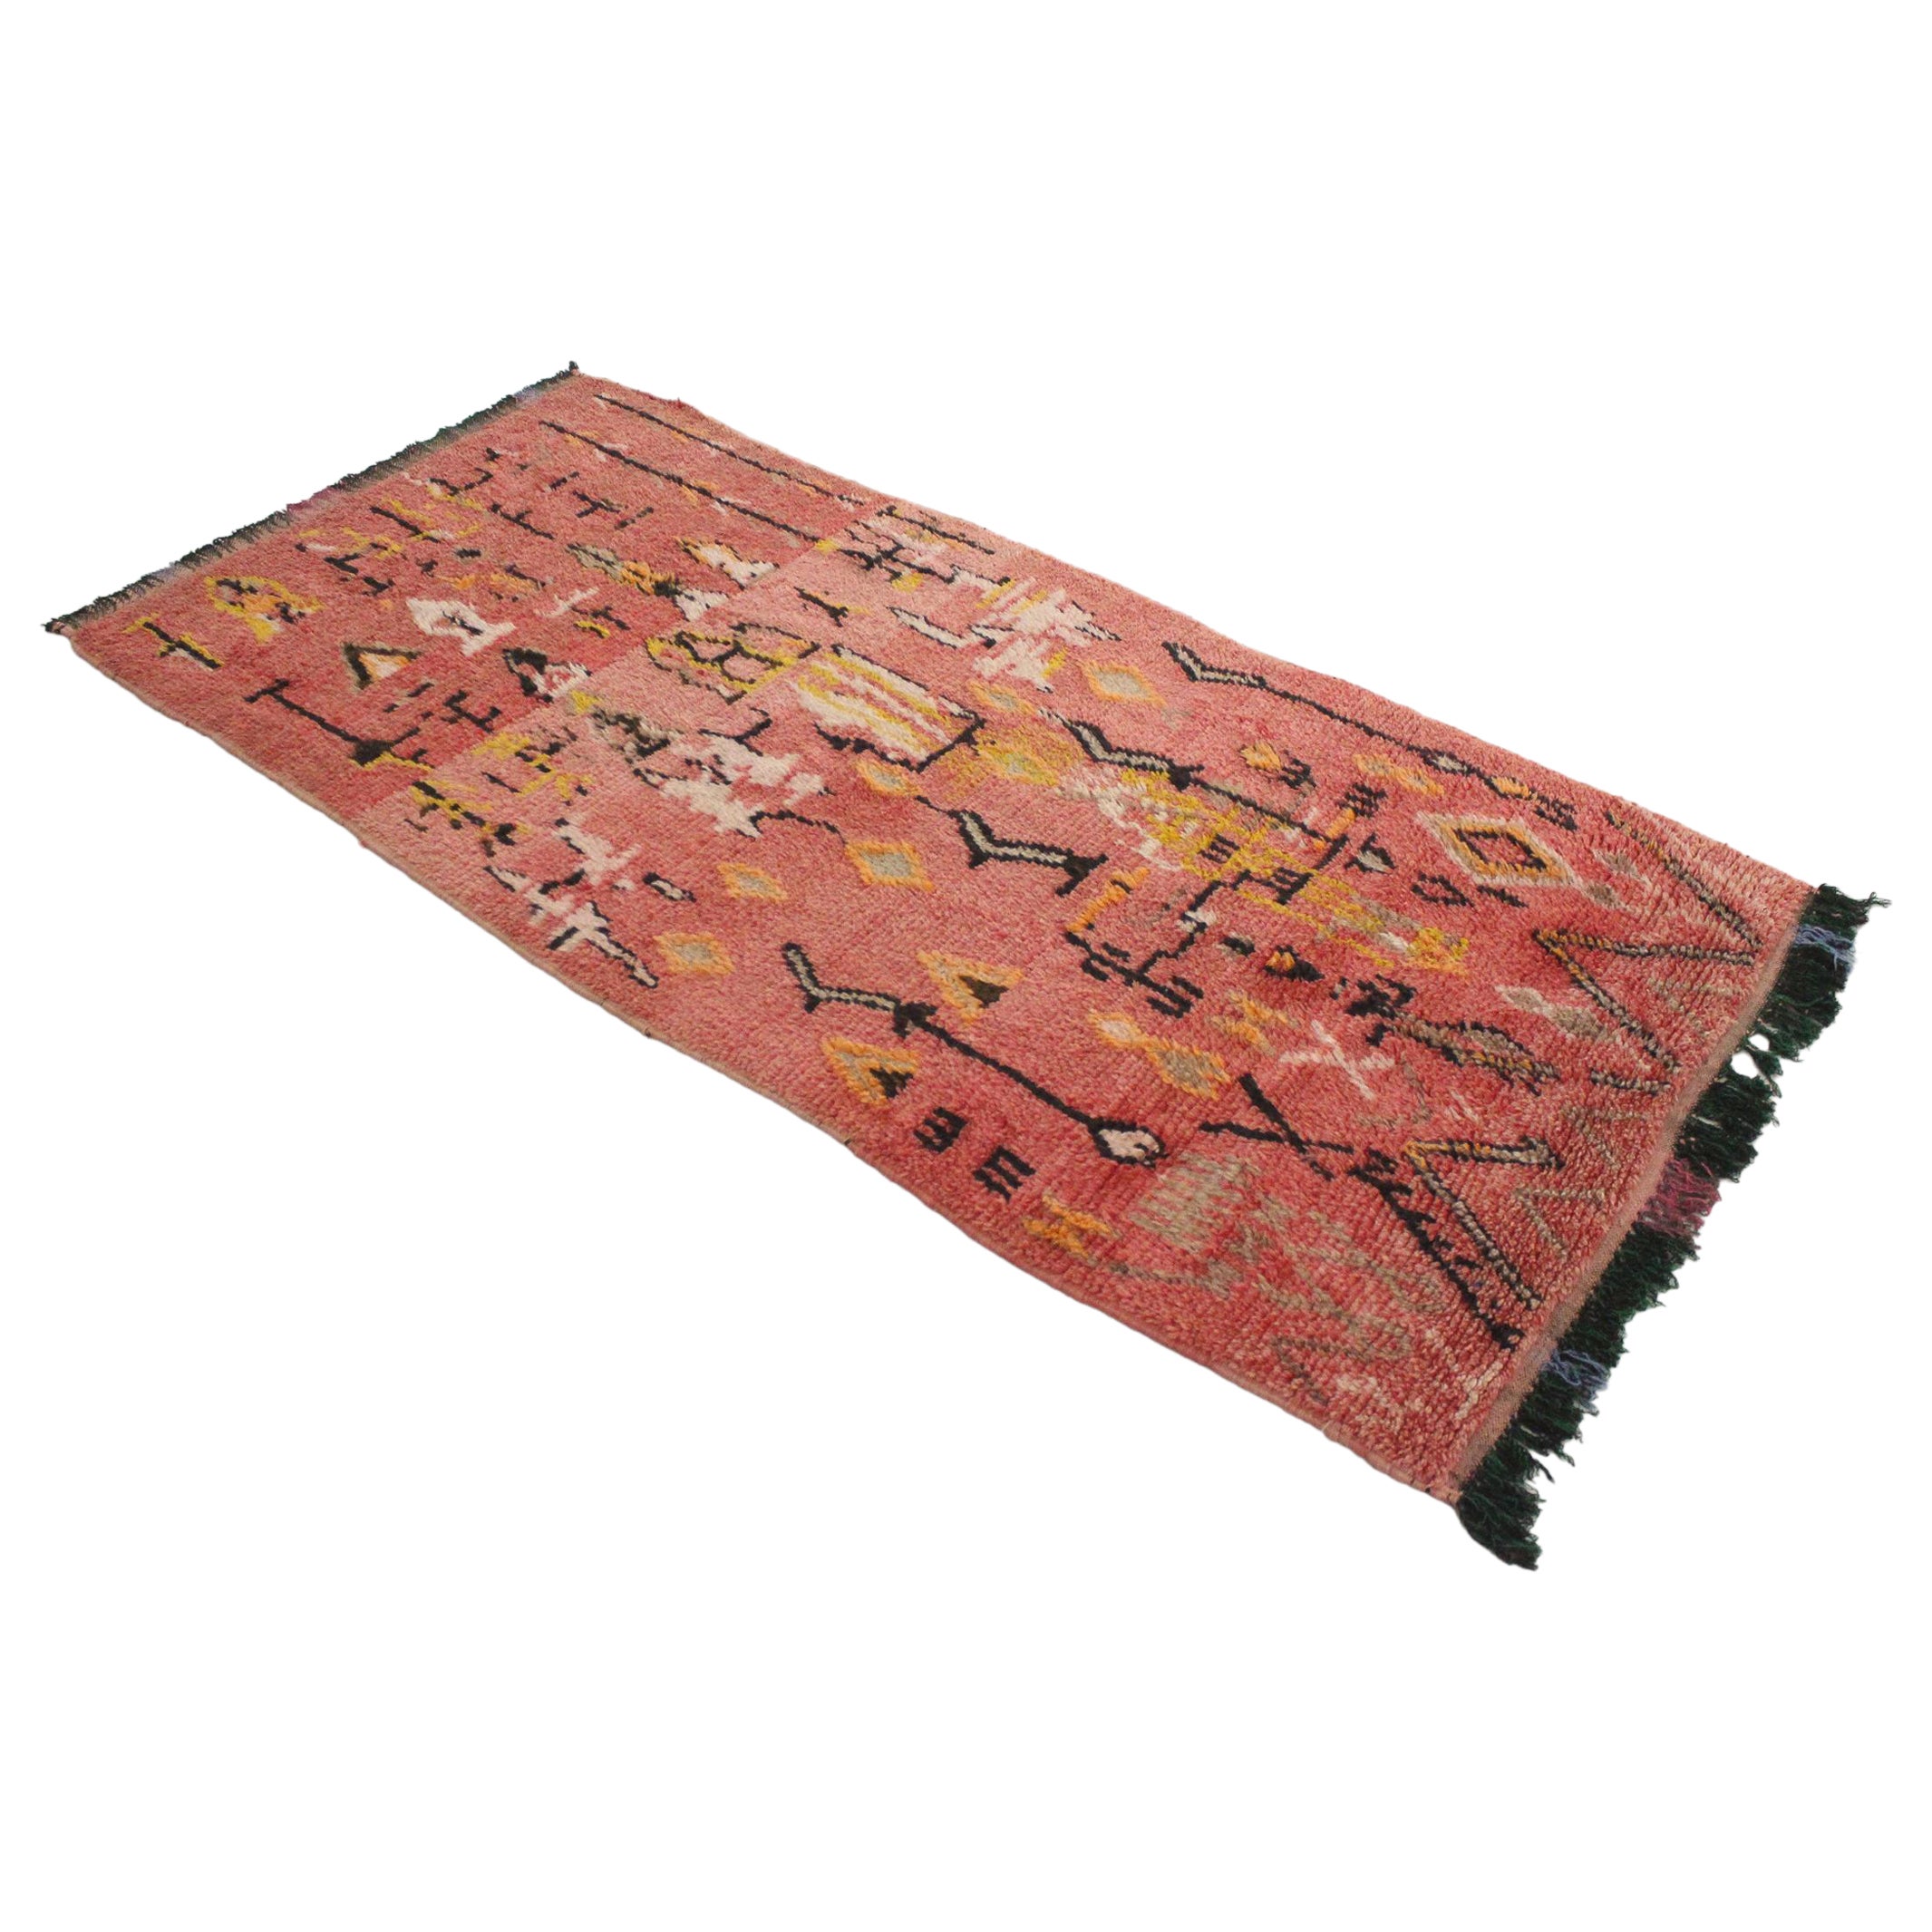 Vintage Moroccan Azilal rug - Pink and yellow - 3.7x7.7feet / 114x236cm For Sale